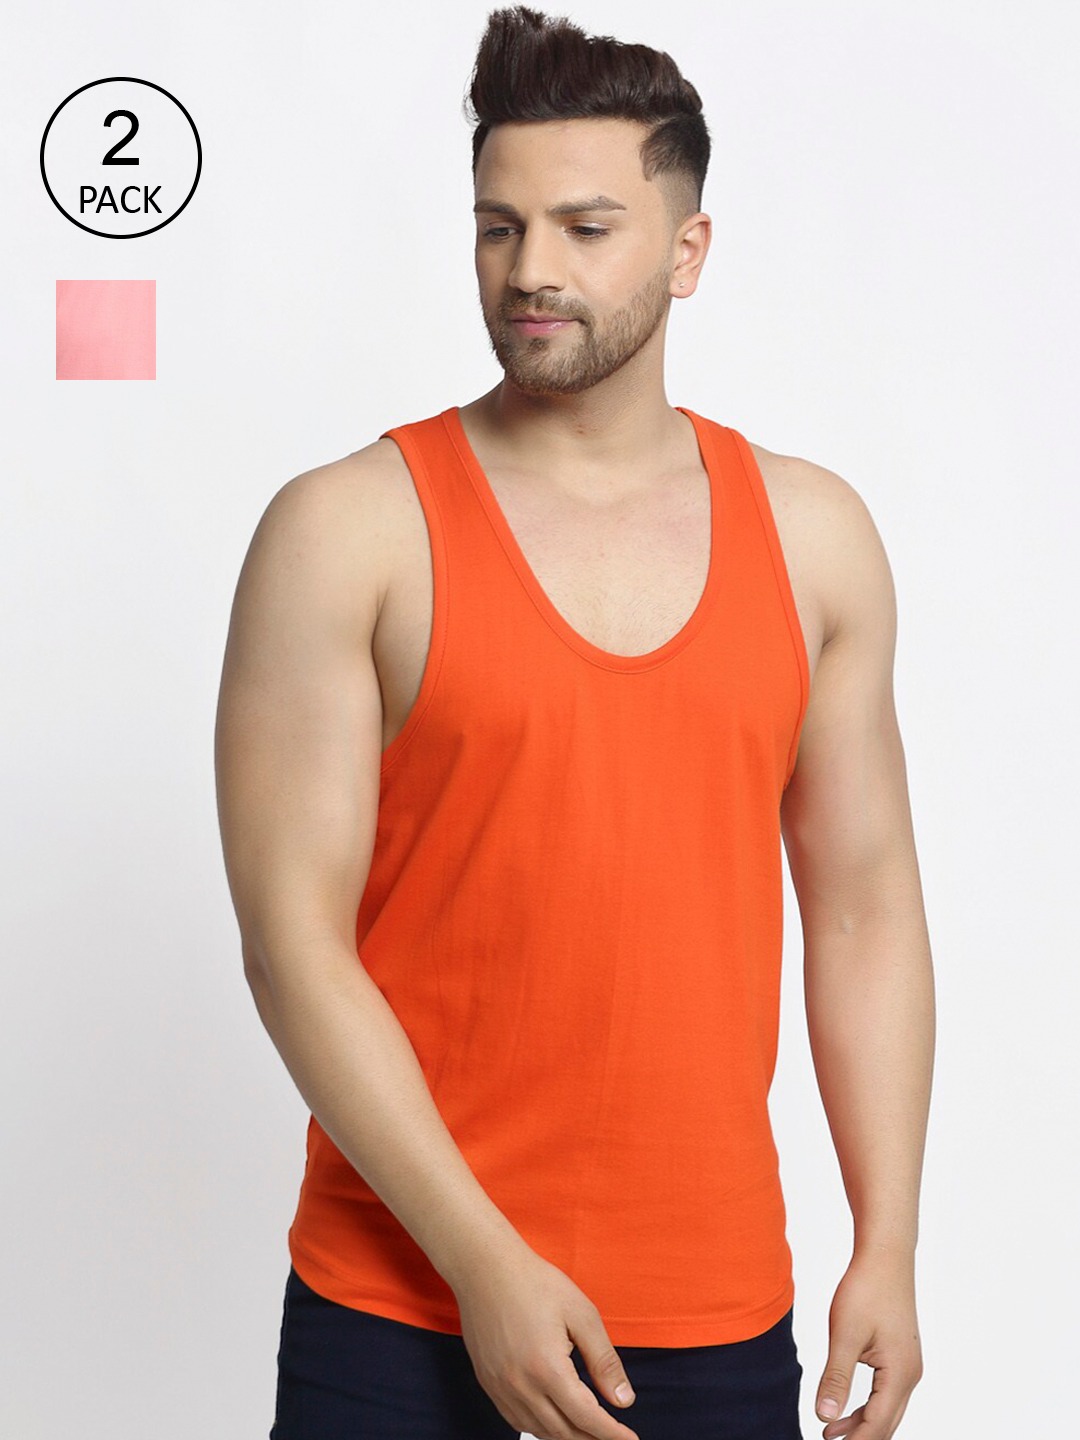 Clothing Innerwear Vests | Friskers Men Pack of 2 Solid Pure Cotton Innerwear Gym Vests - HM50346